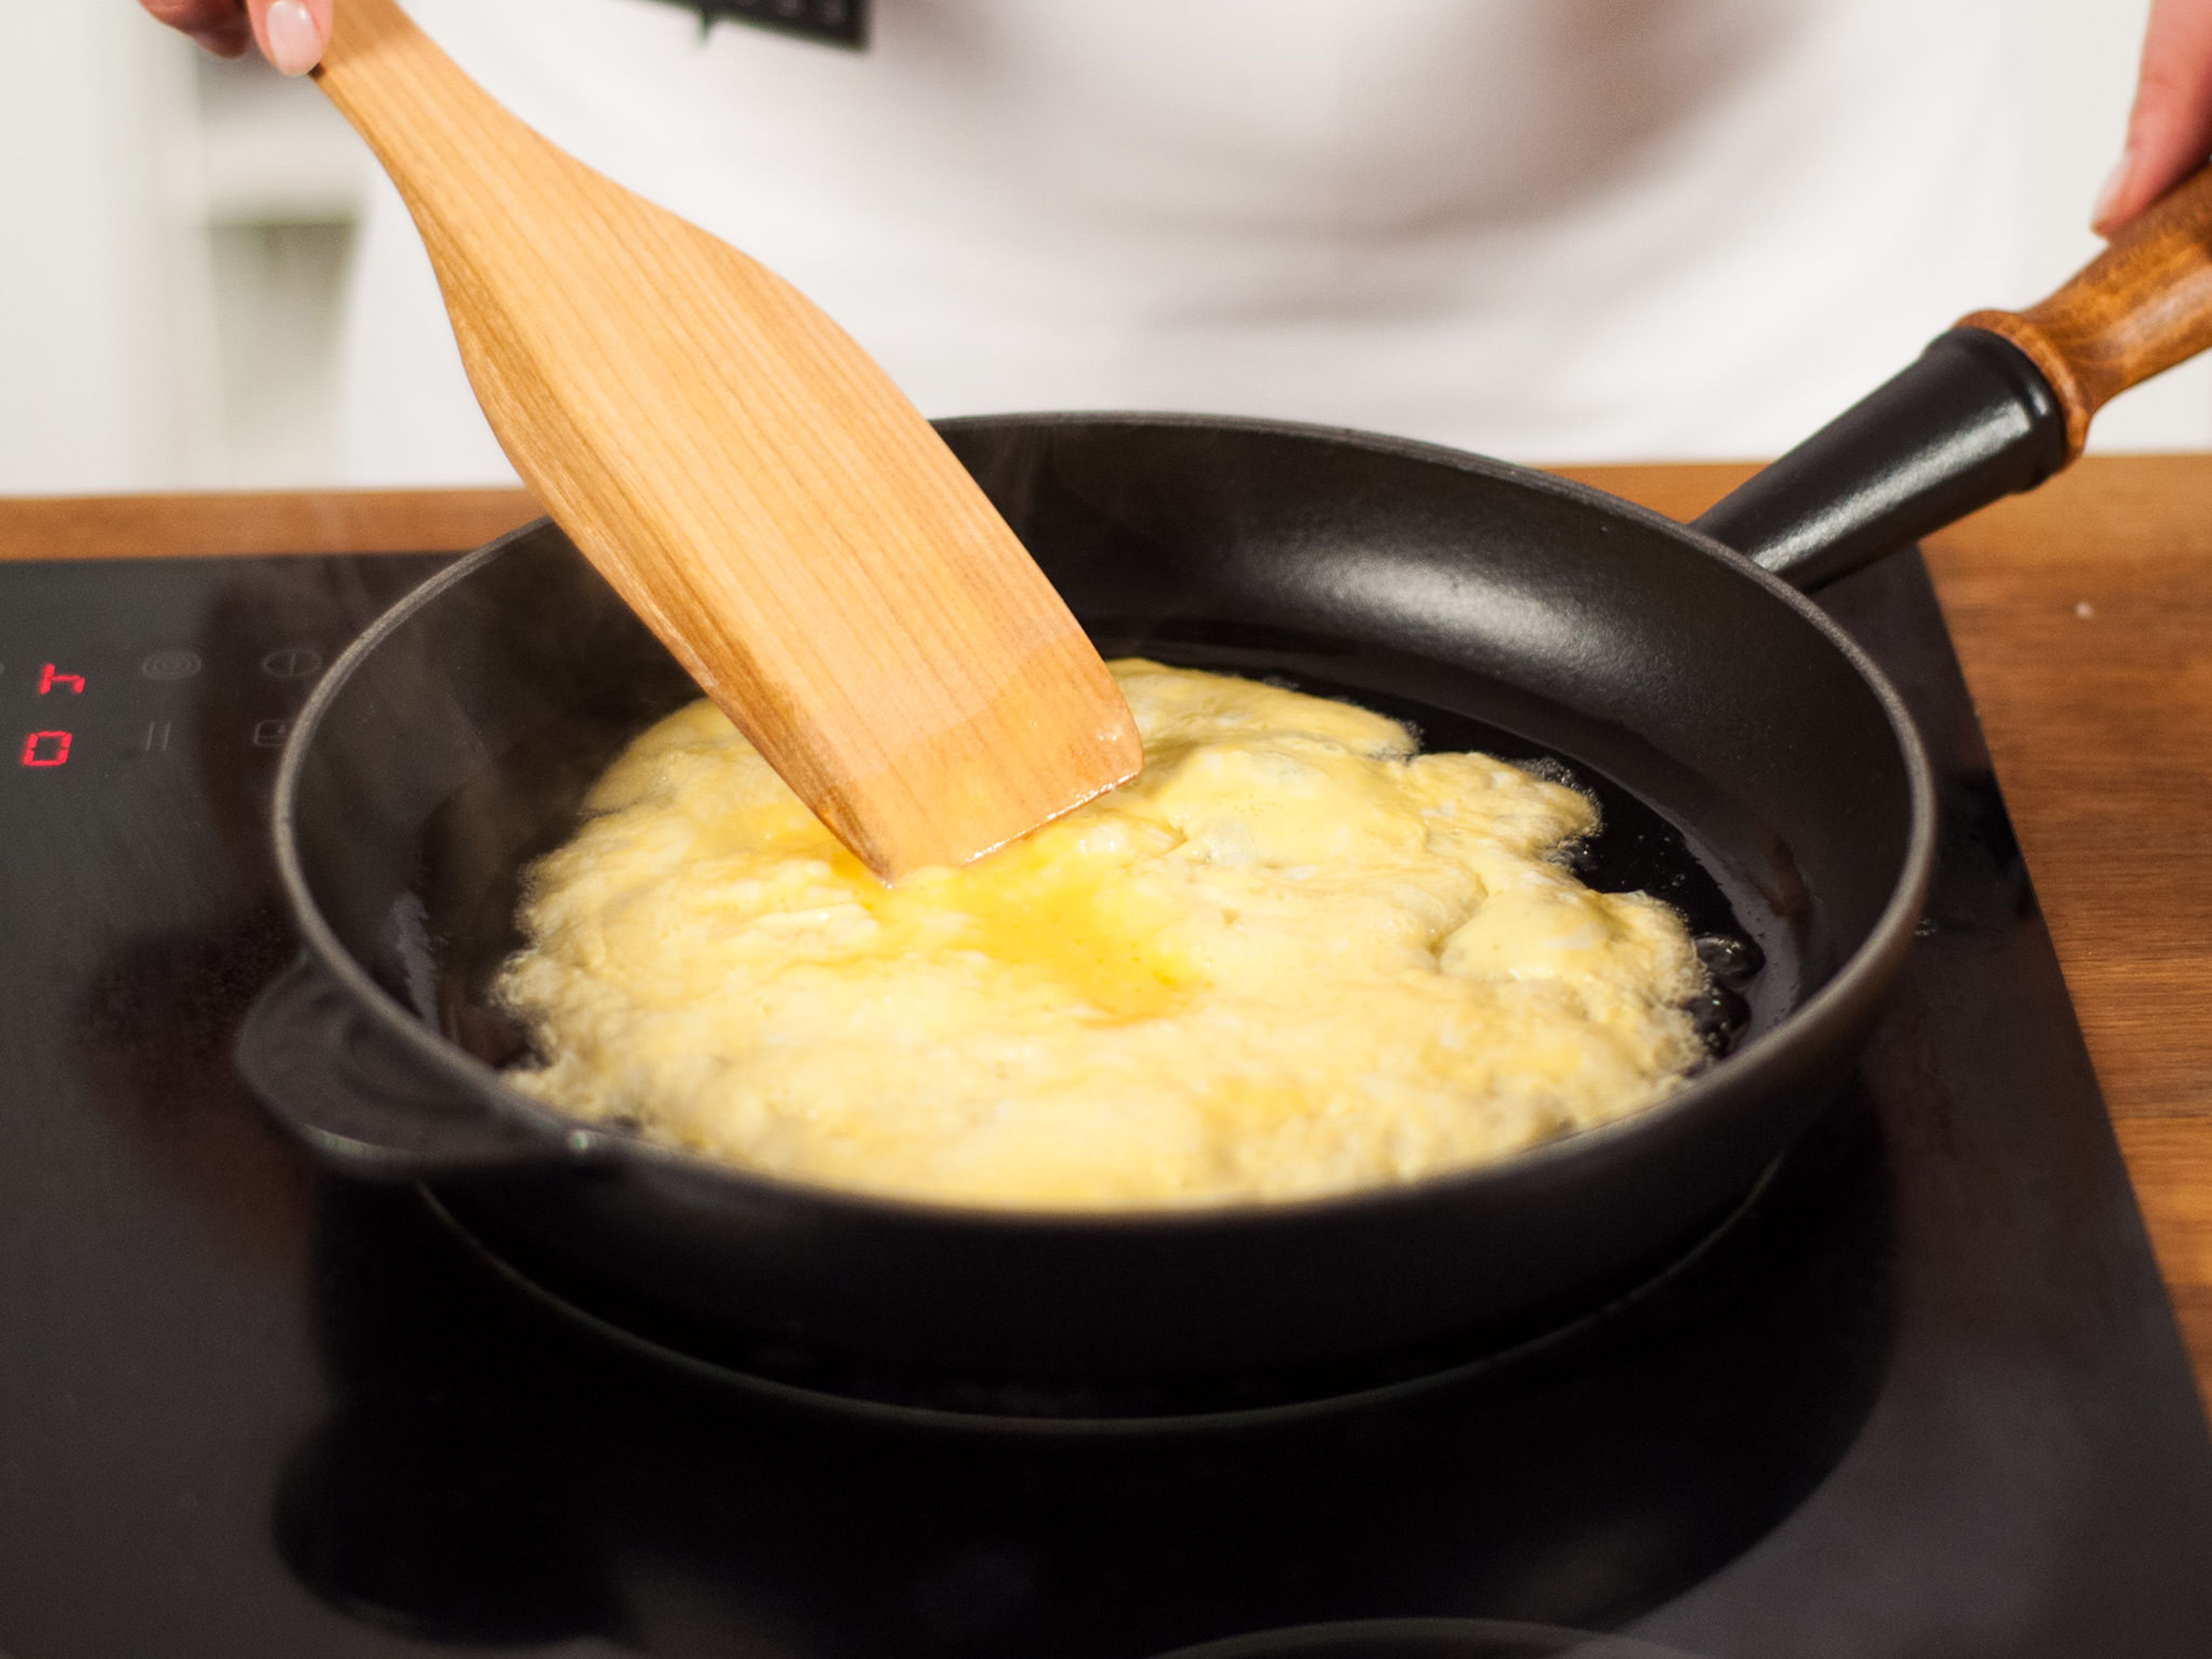 Preheat vegetable oil in a frying pan over medium heat. Then, add eggs to the pan and fry in one layer for approx. 1 – 2 min. from each side. Set aside to cool.